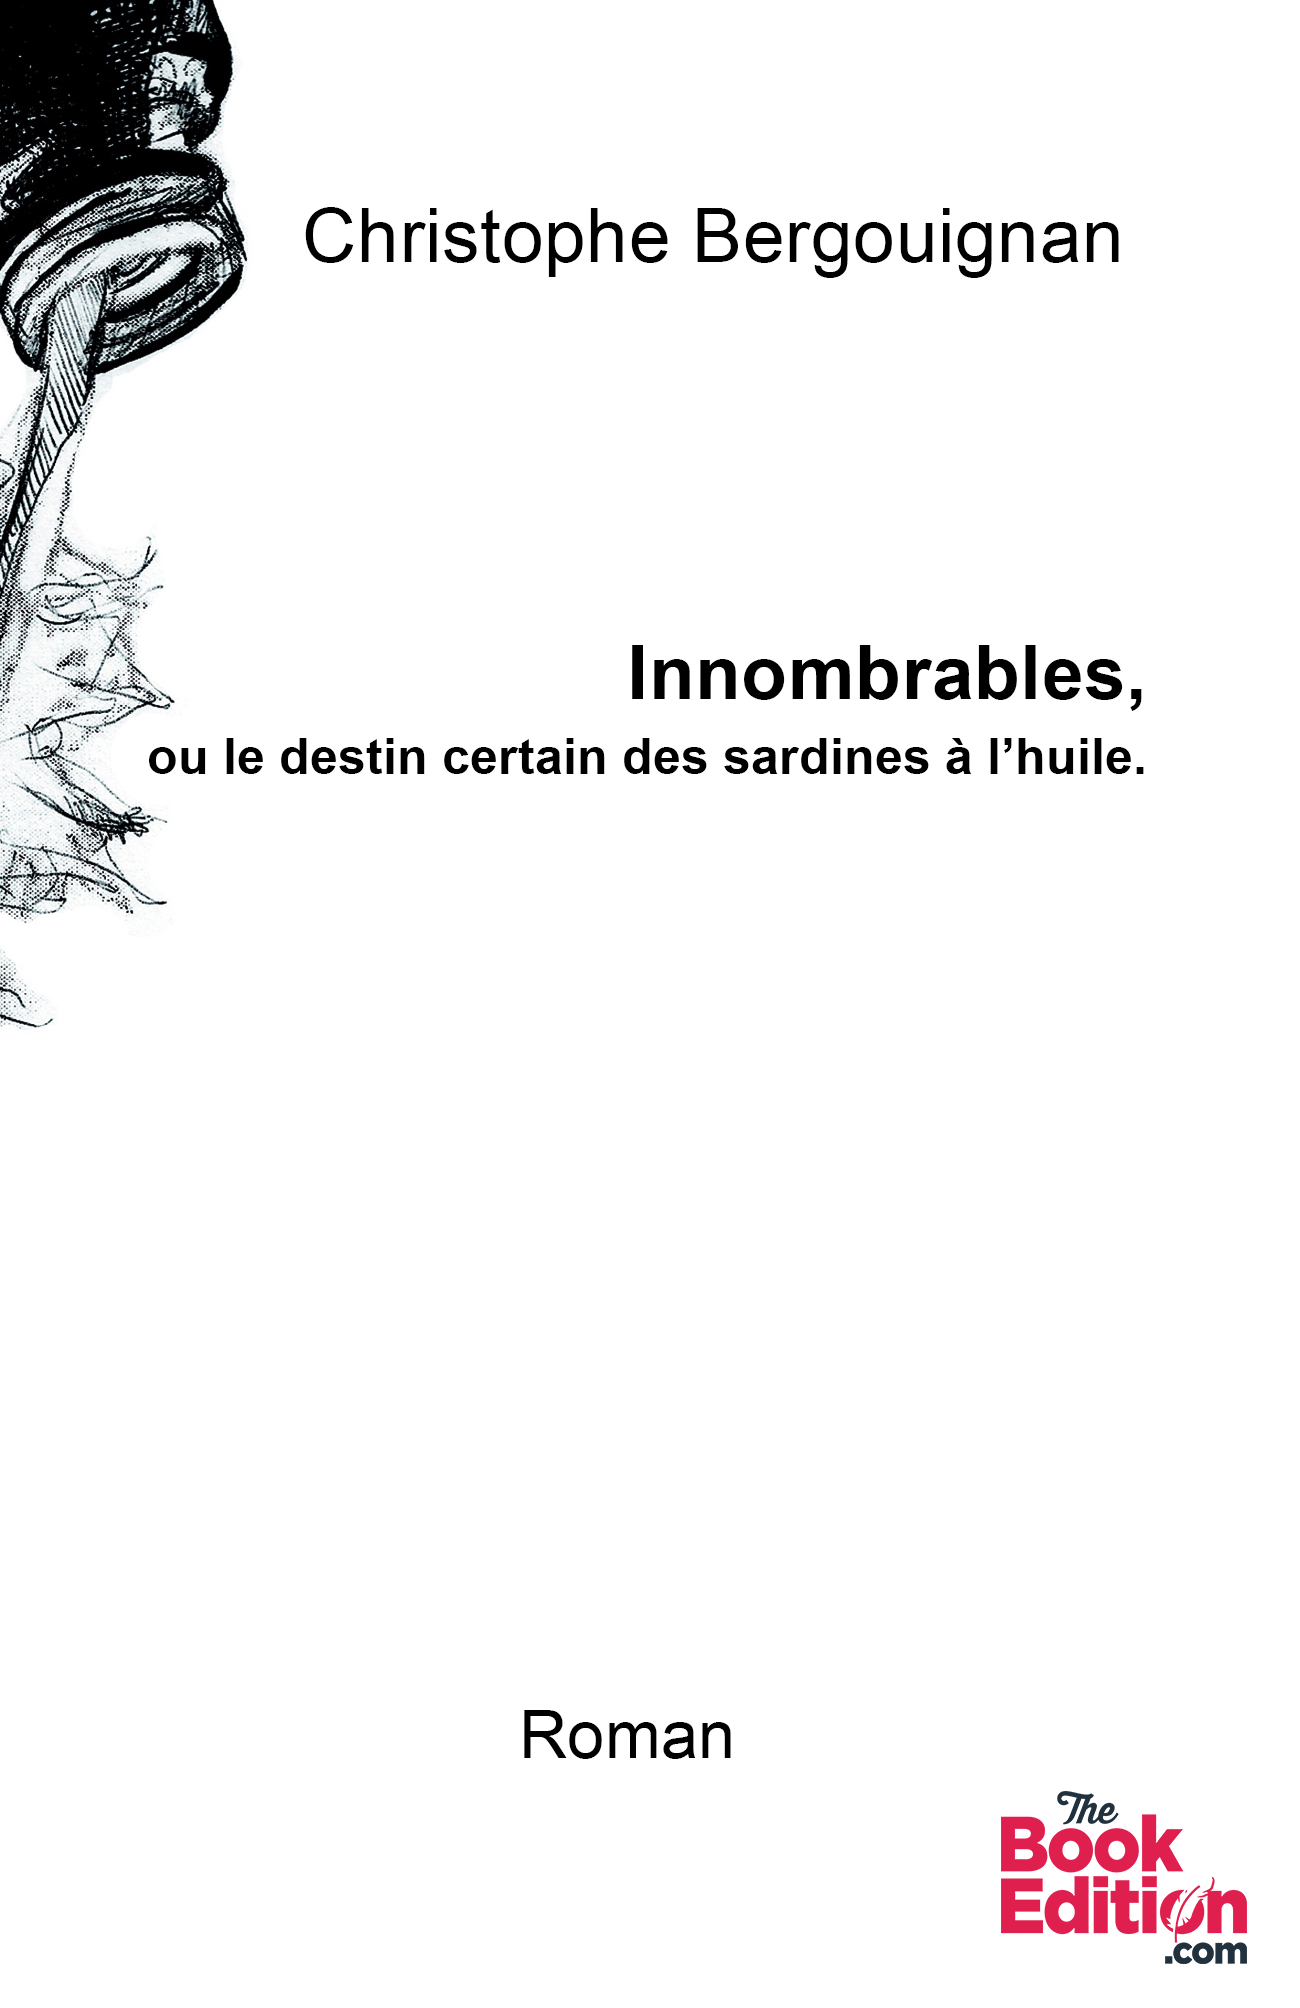 Innombrables